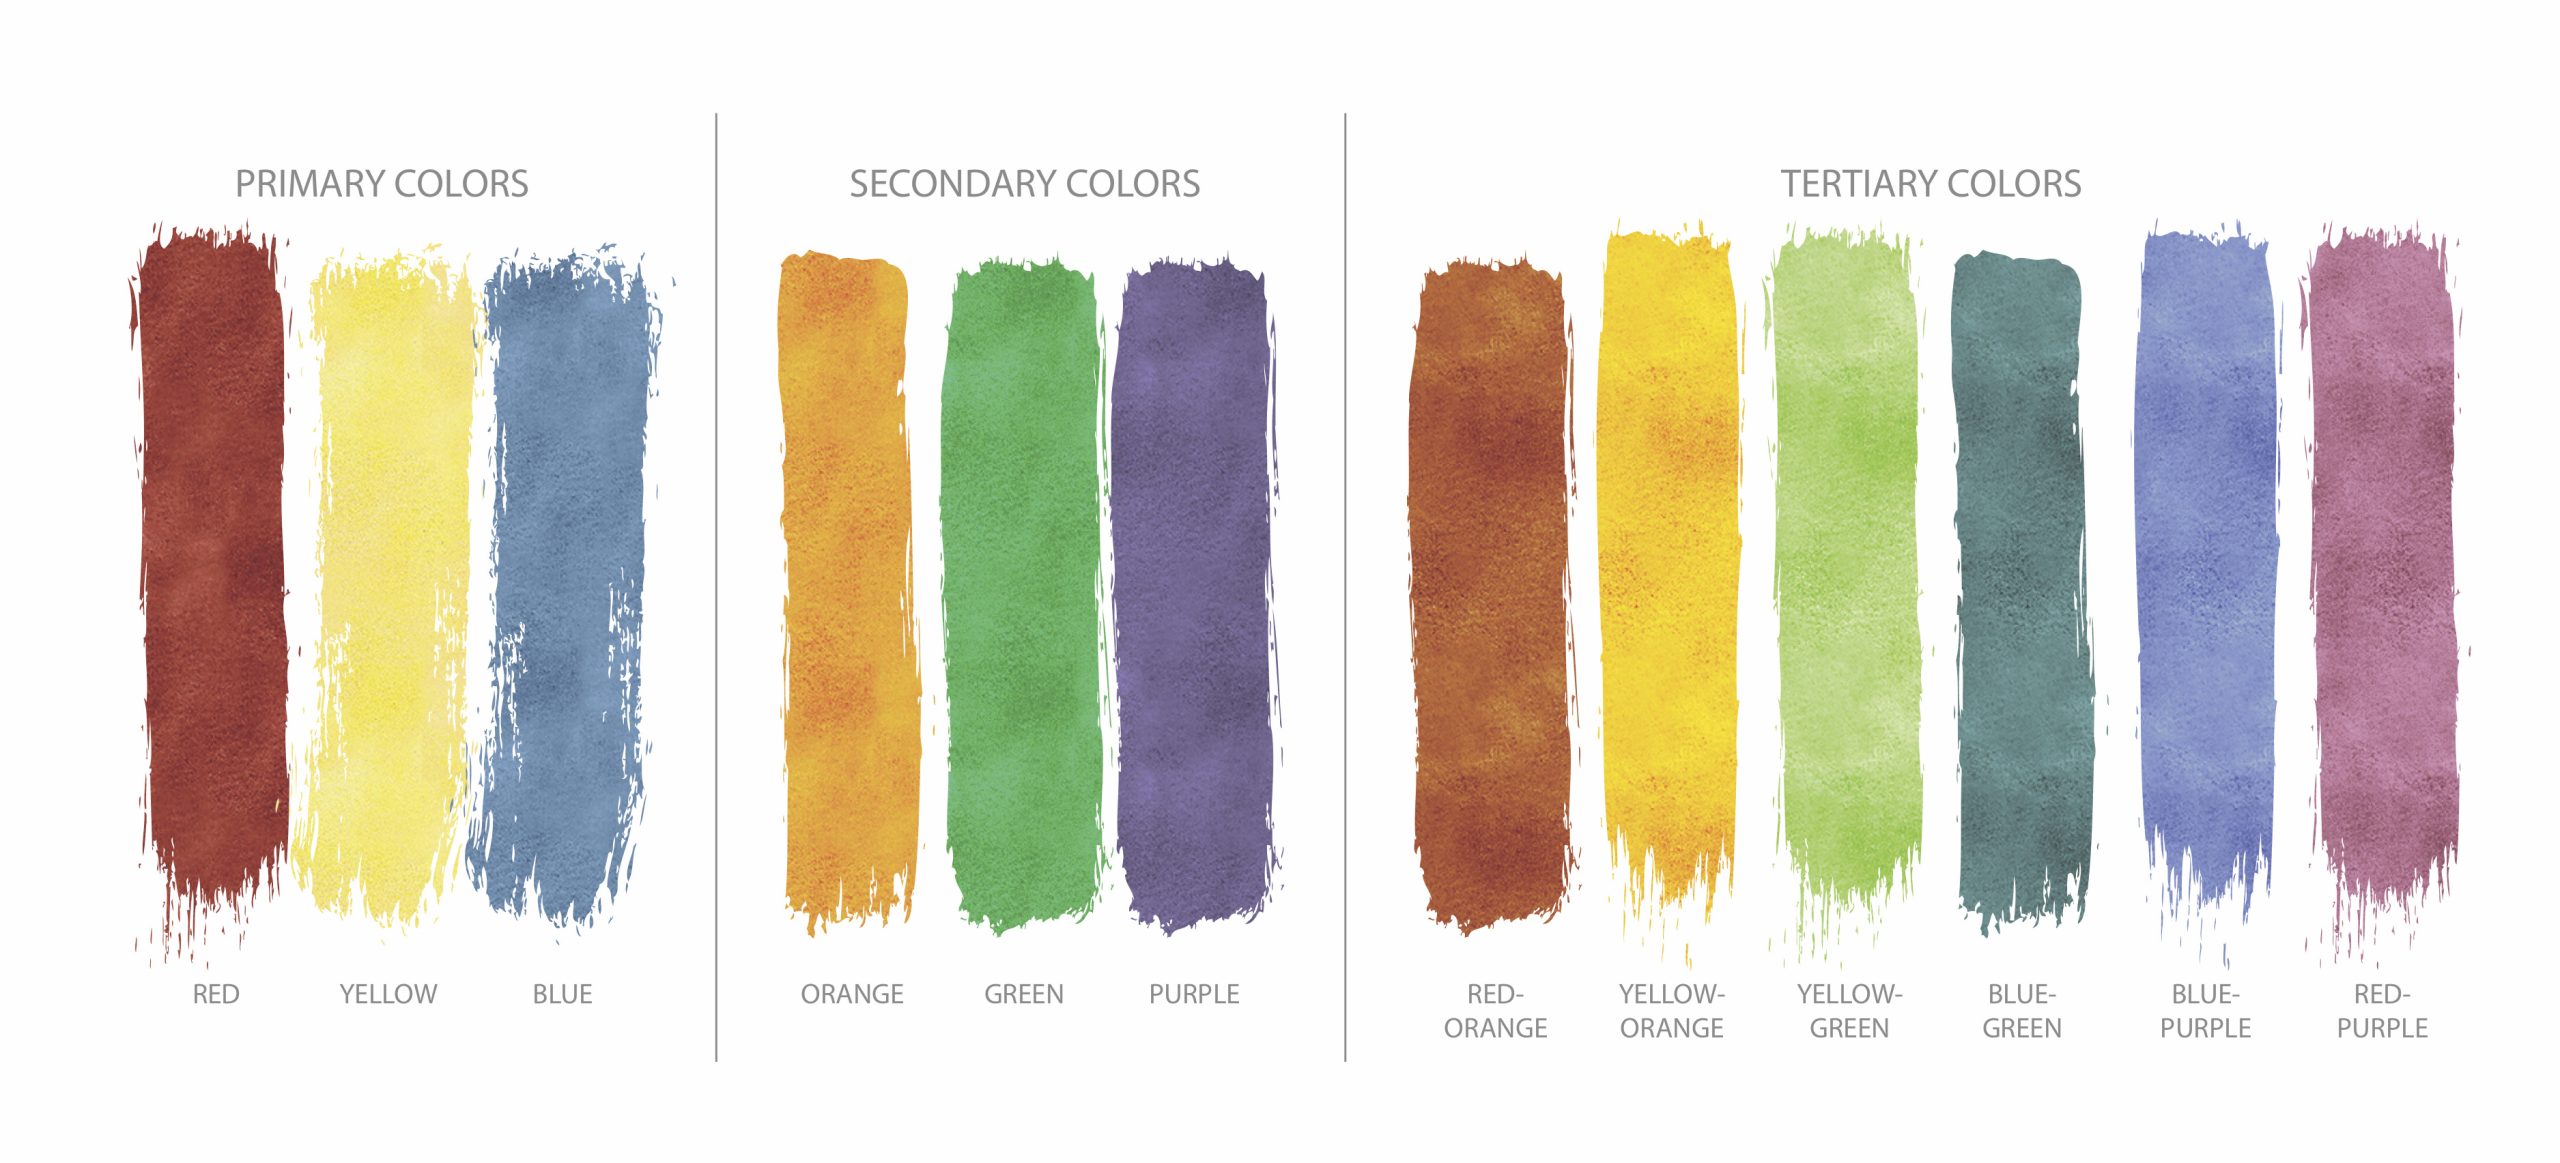 color-theory